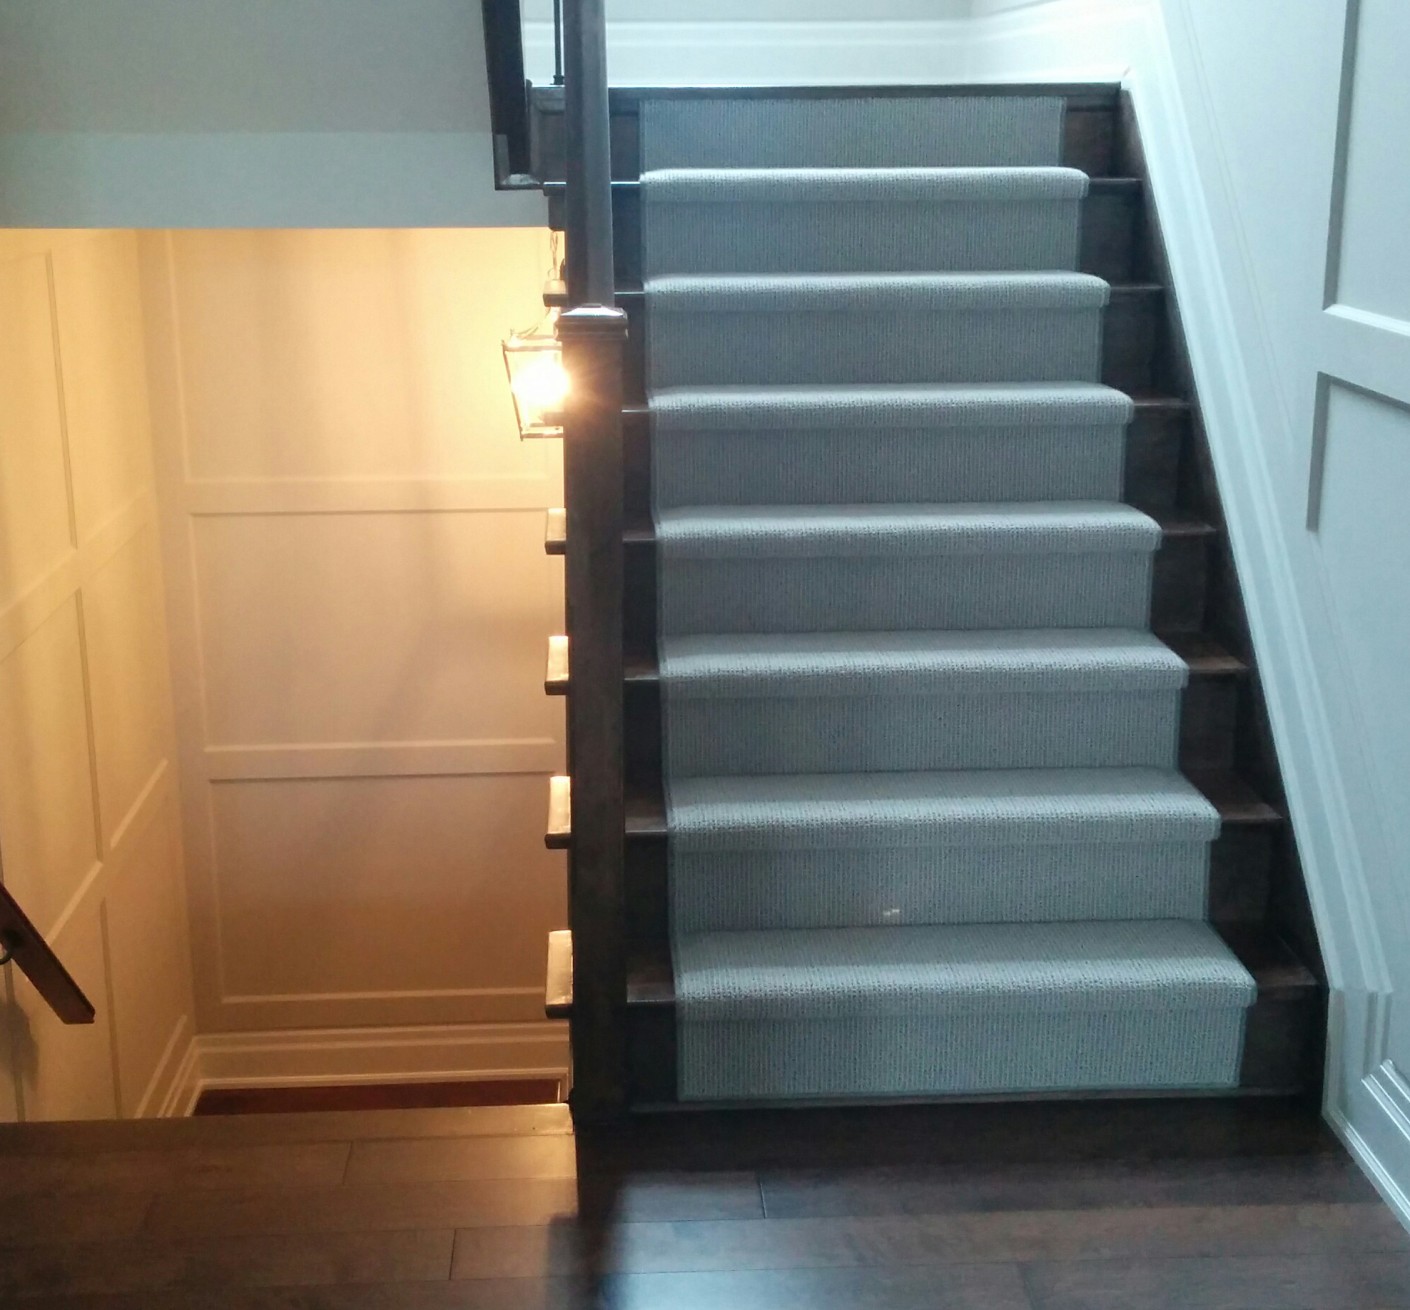 Modern Wool Carpet Runner on Stairs, Sales and Installation Services Toronto